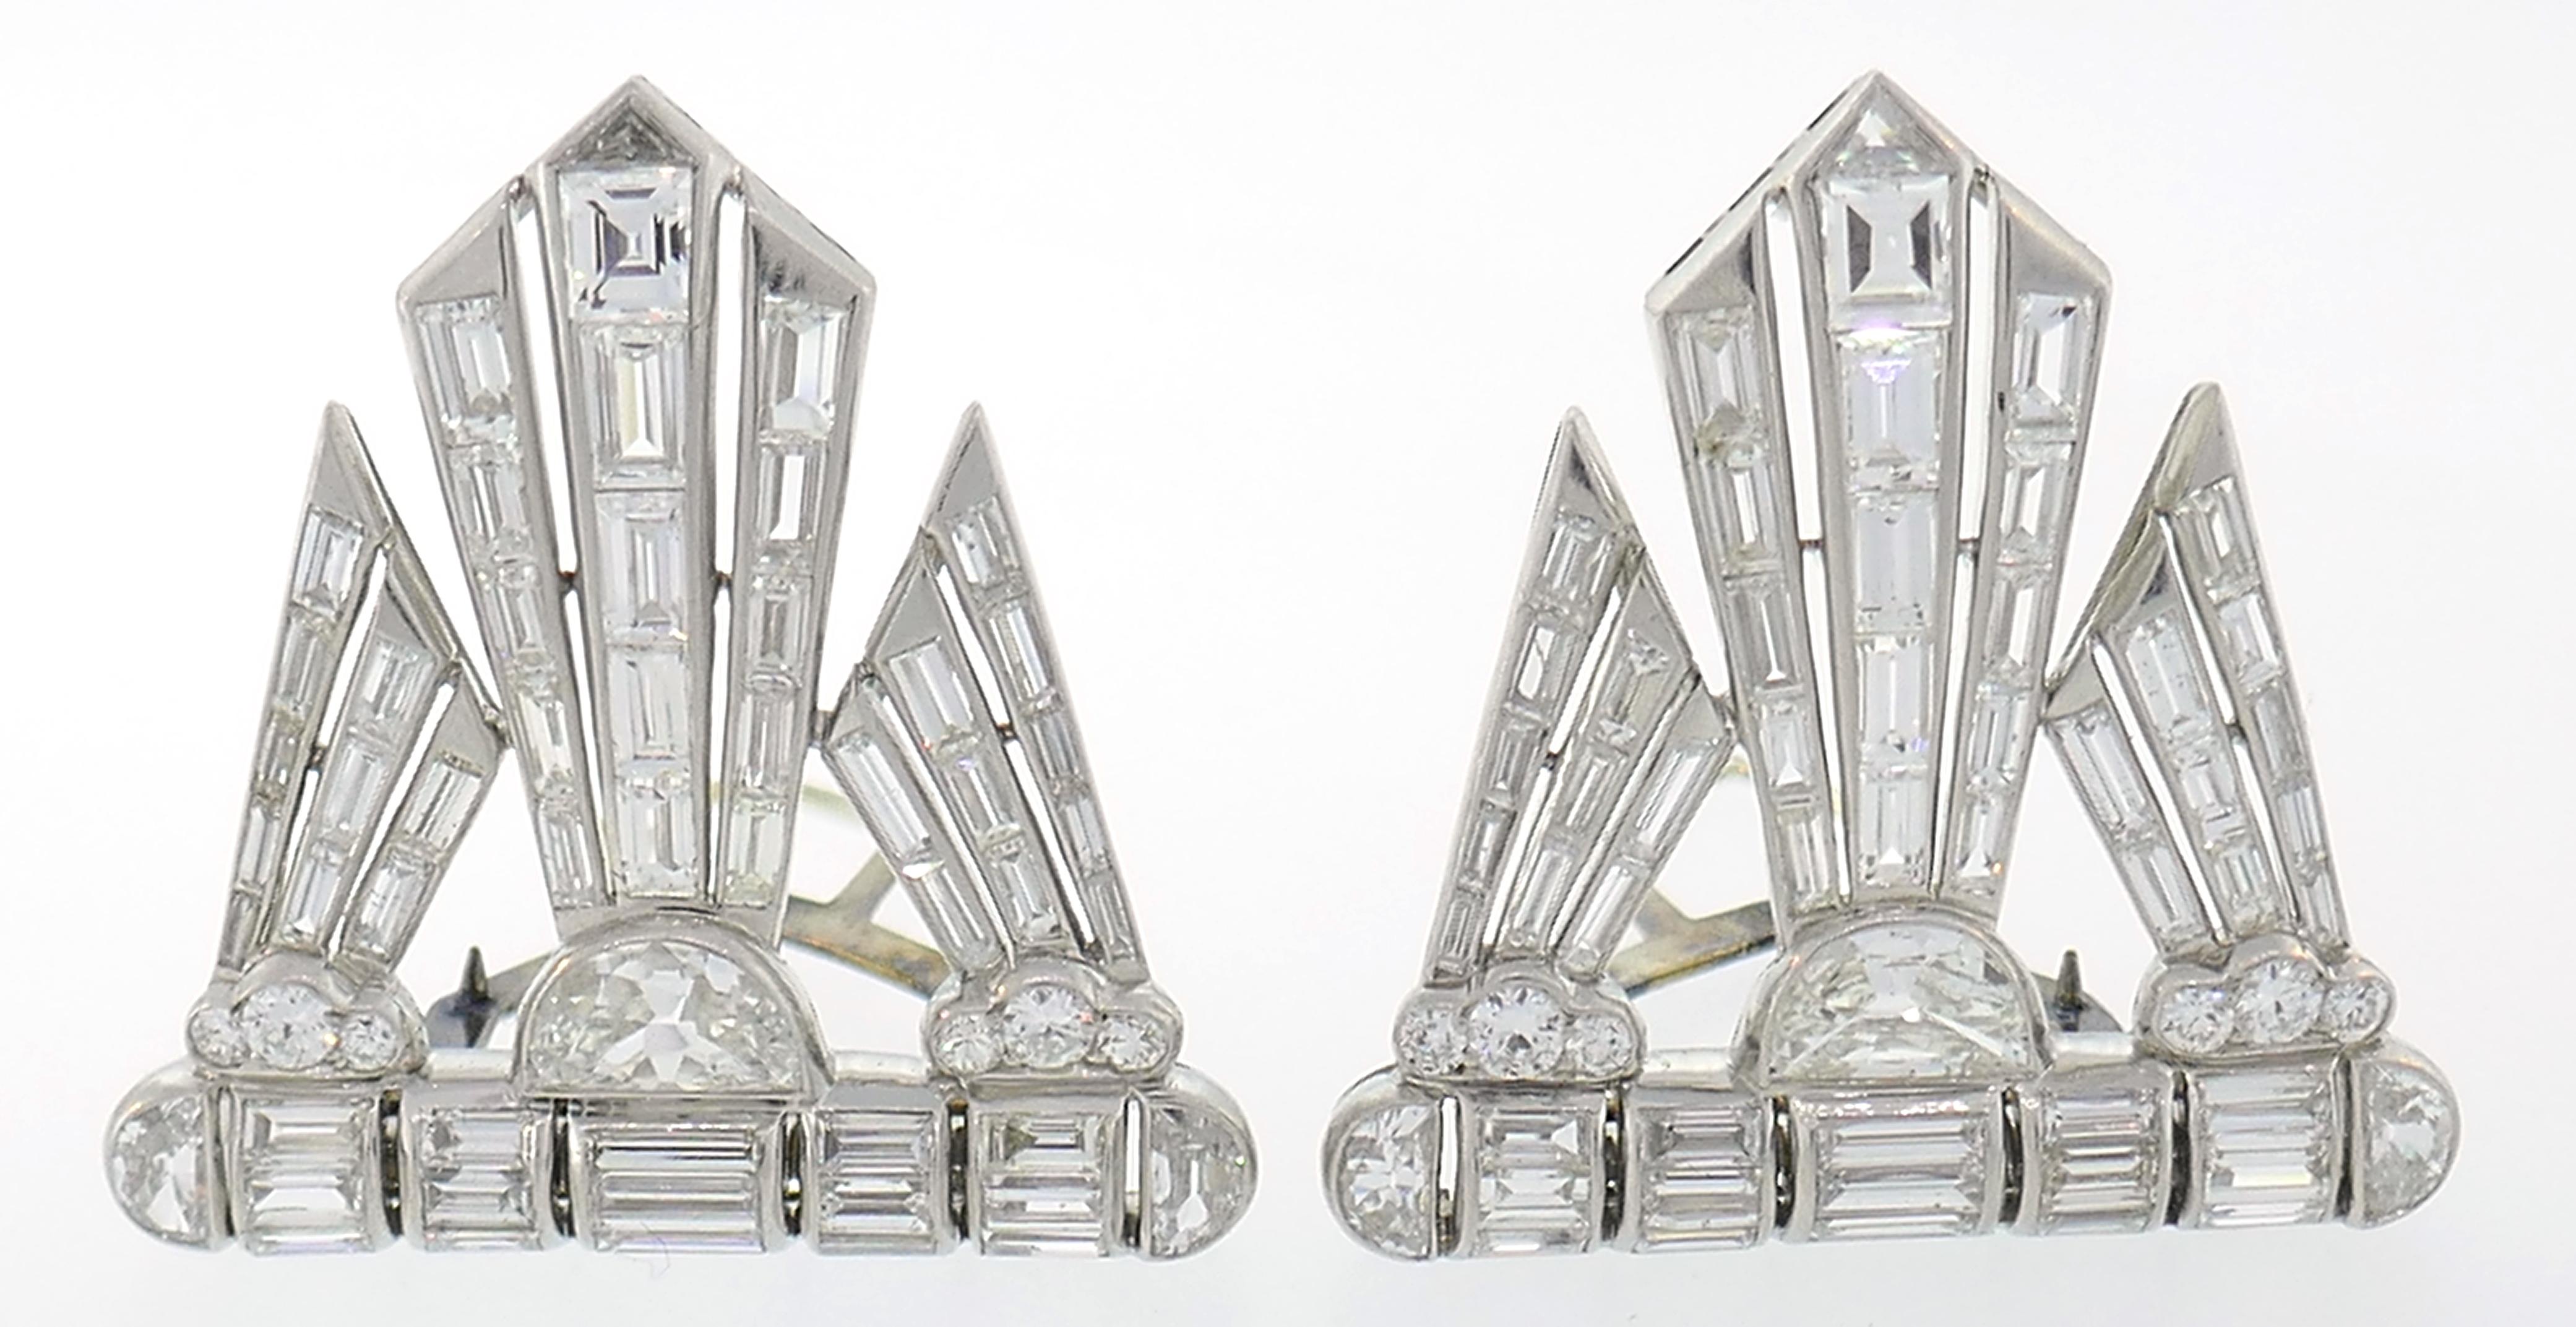 Classy Art Deco brooch that turns into a pair of double clips. Elegant, versatile, timeless and wearable, the pin is a great addition to your jewelry collection.
Made of platinum (tested) and set with round, baguette and half-moon cut diamonds. The